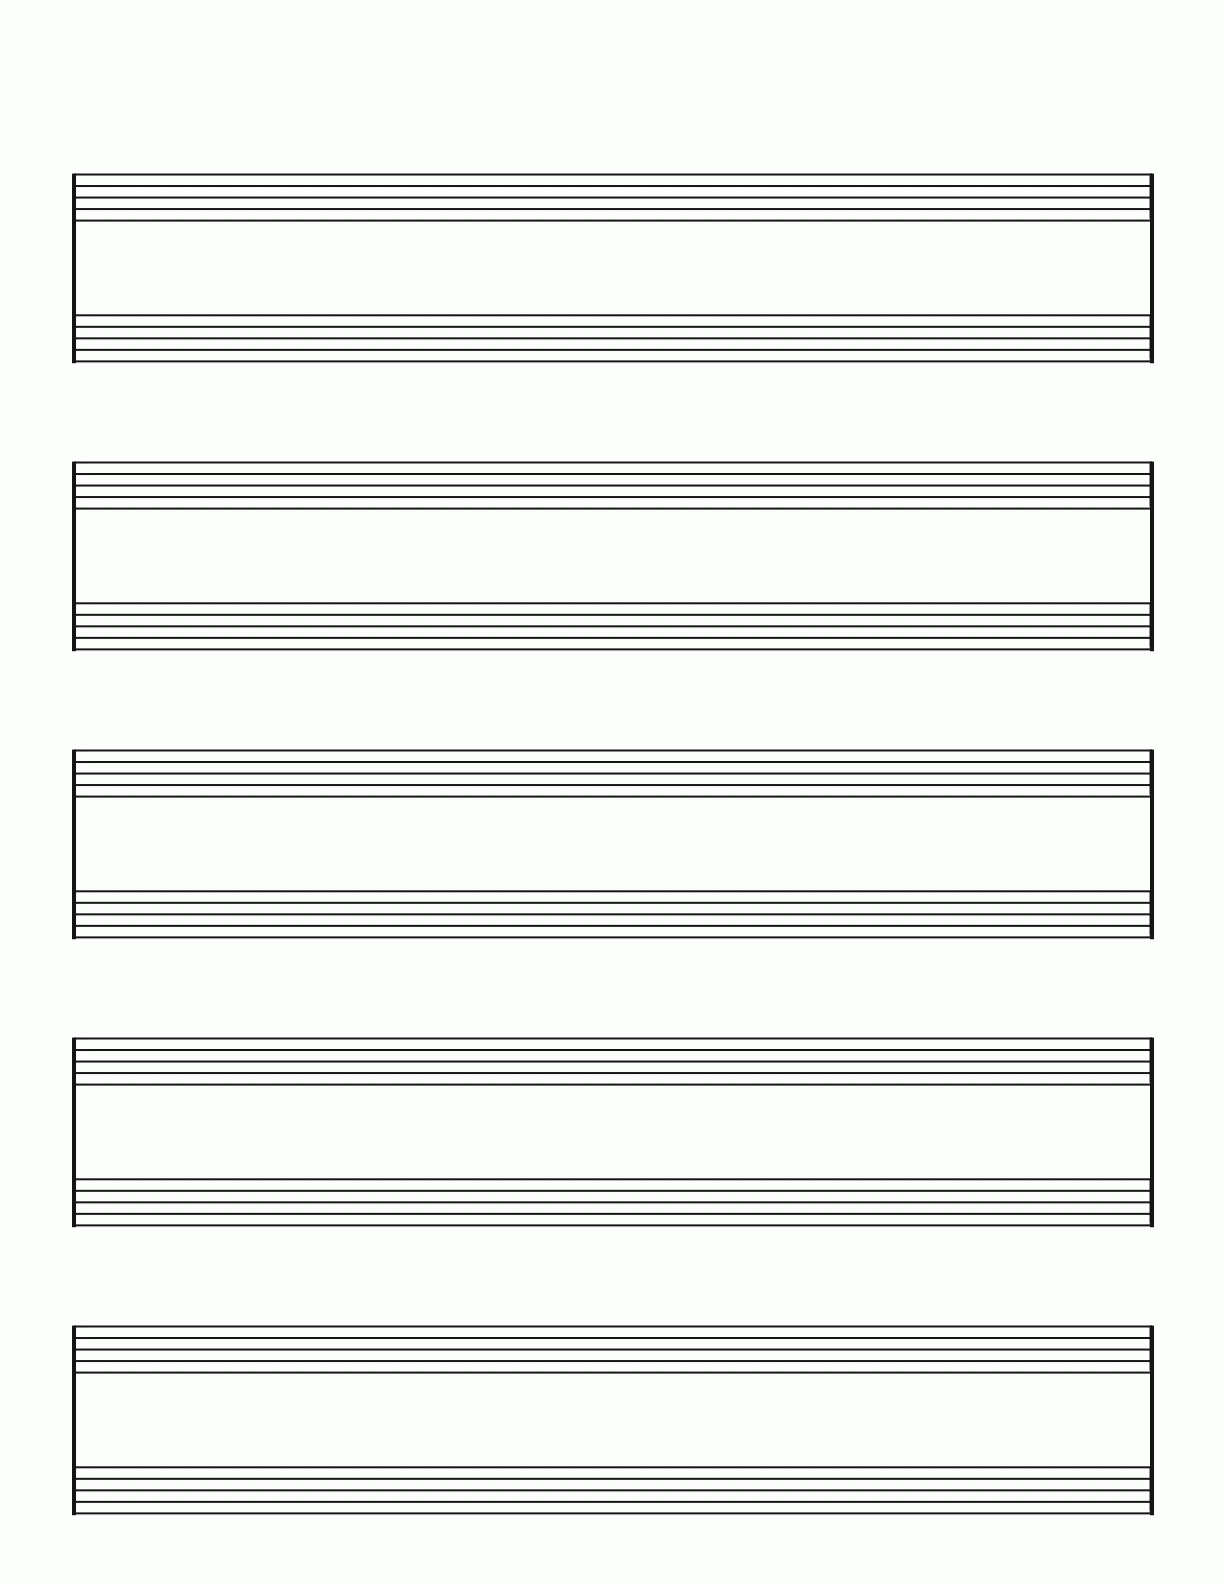 Free Music Sheet Images, Download Free Clip Art, Free Clip With Blank Sheet Music Template For Word